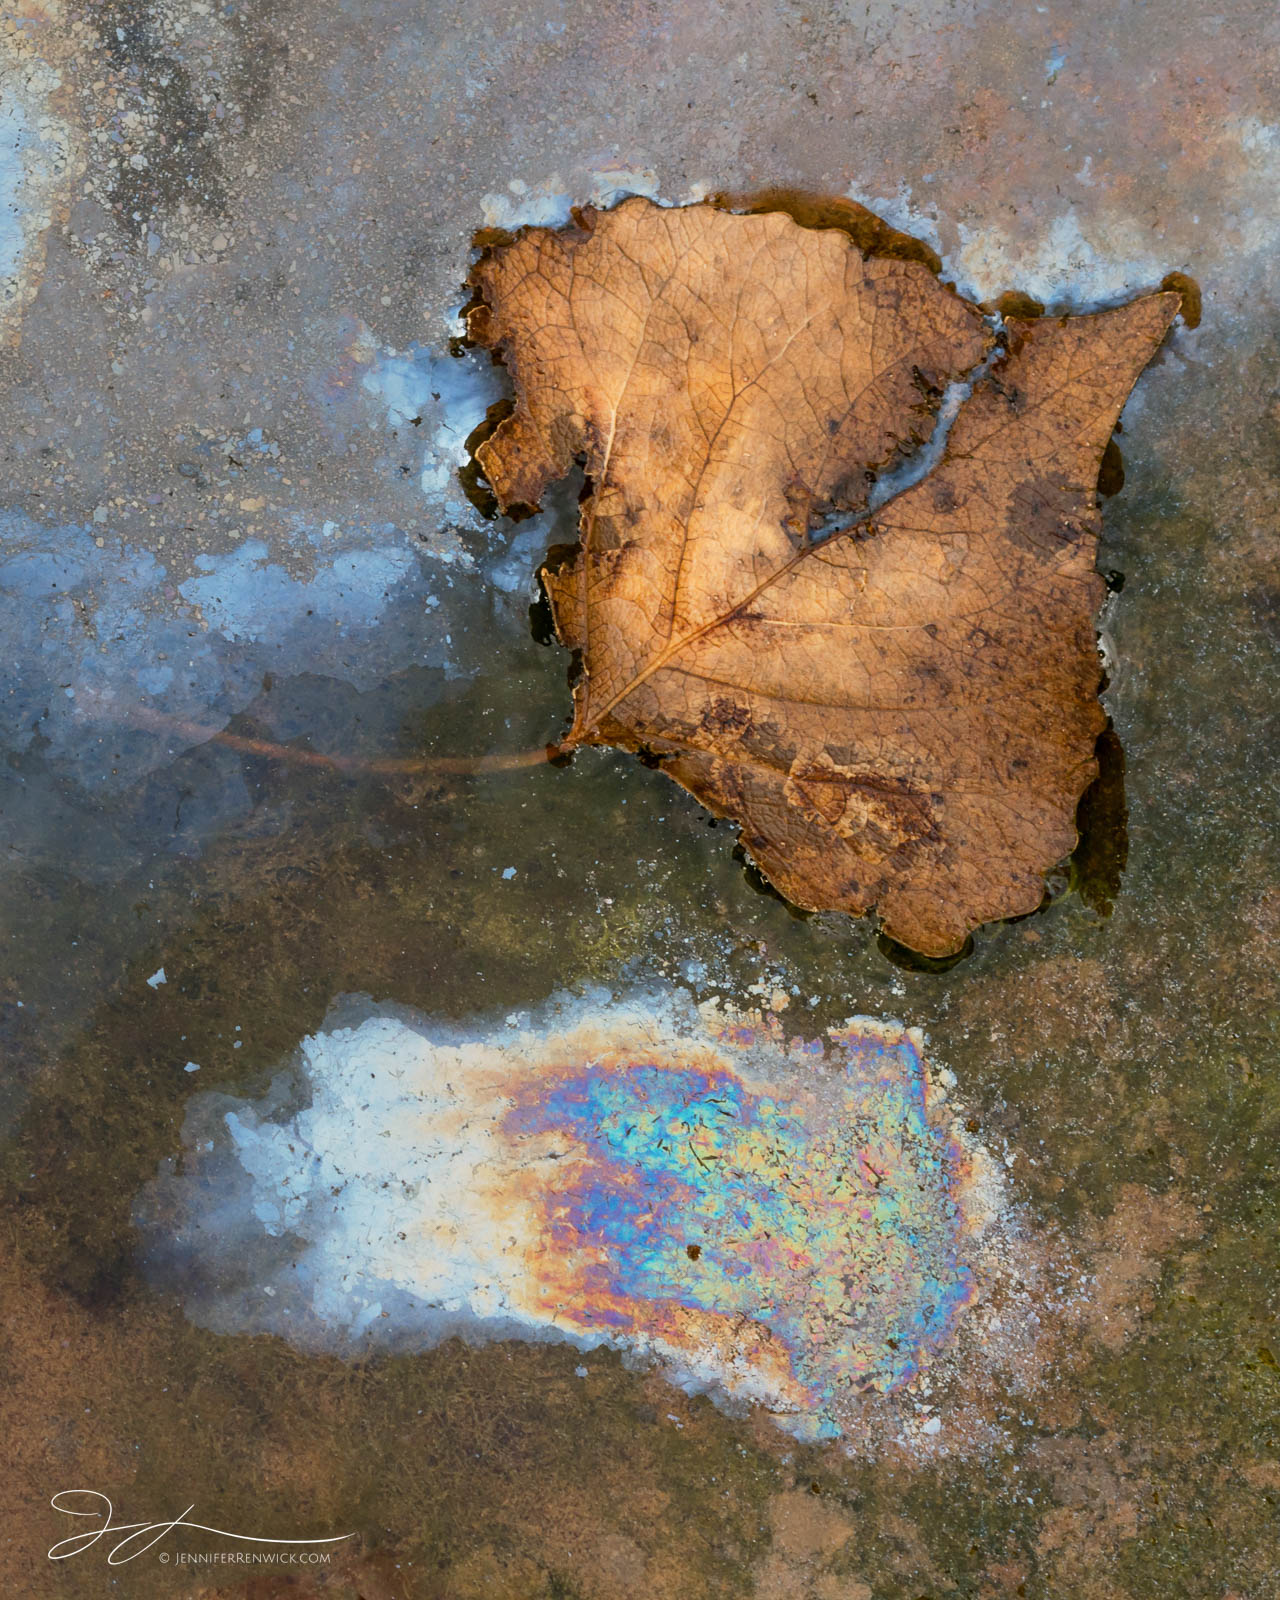 A decaying leaf sits by a small pool of natural oils left behind by decaying organic matter.  This image is part of my "One Final...